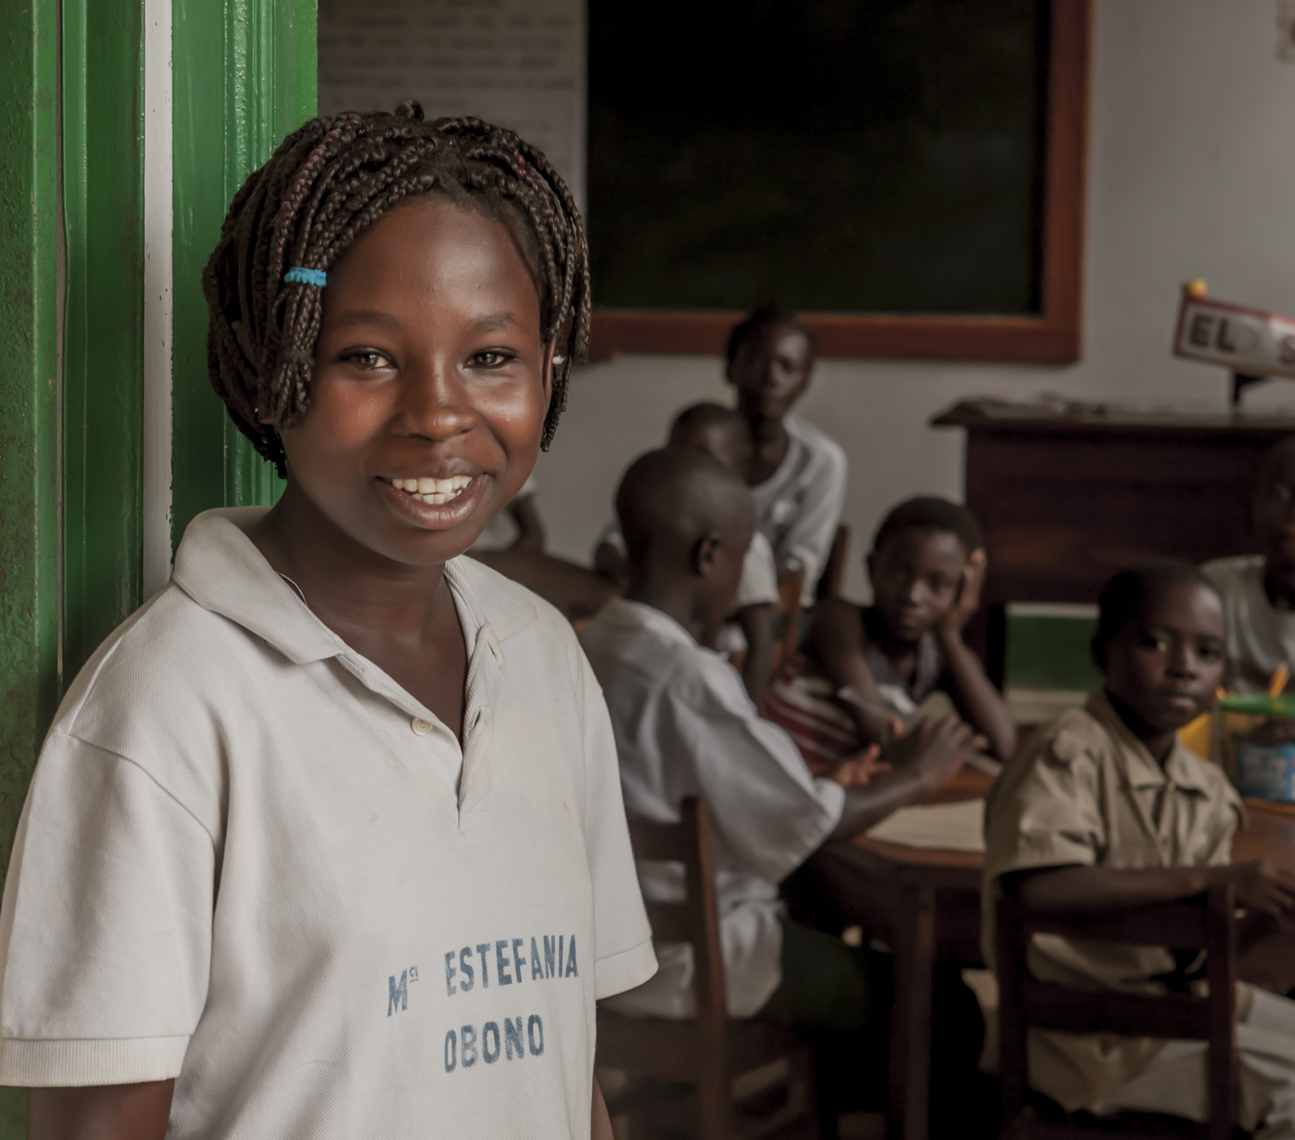 Students attend school in Bata, Equatorial Guinea, West Africa. Shot on assignment for Inc Design.